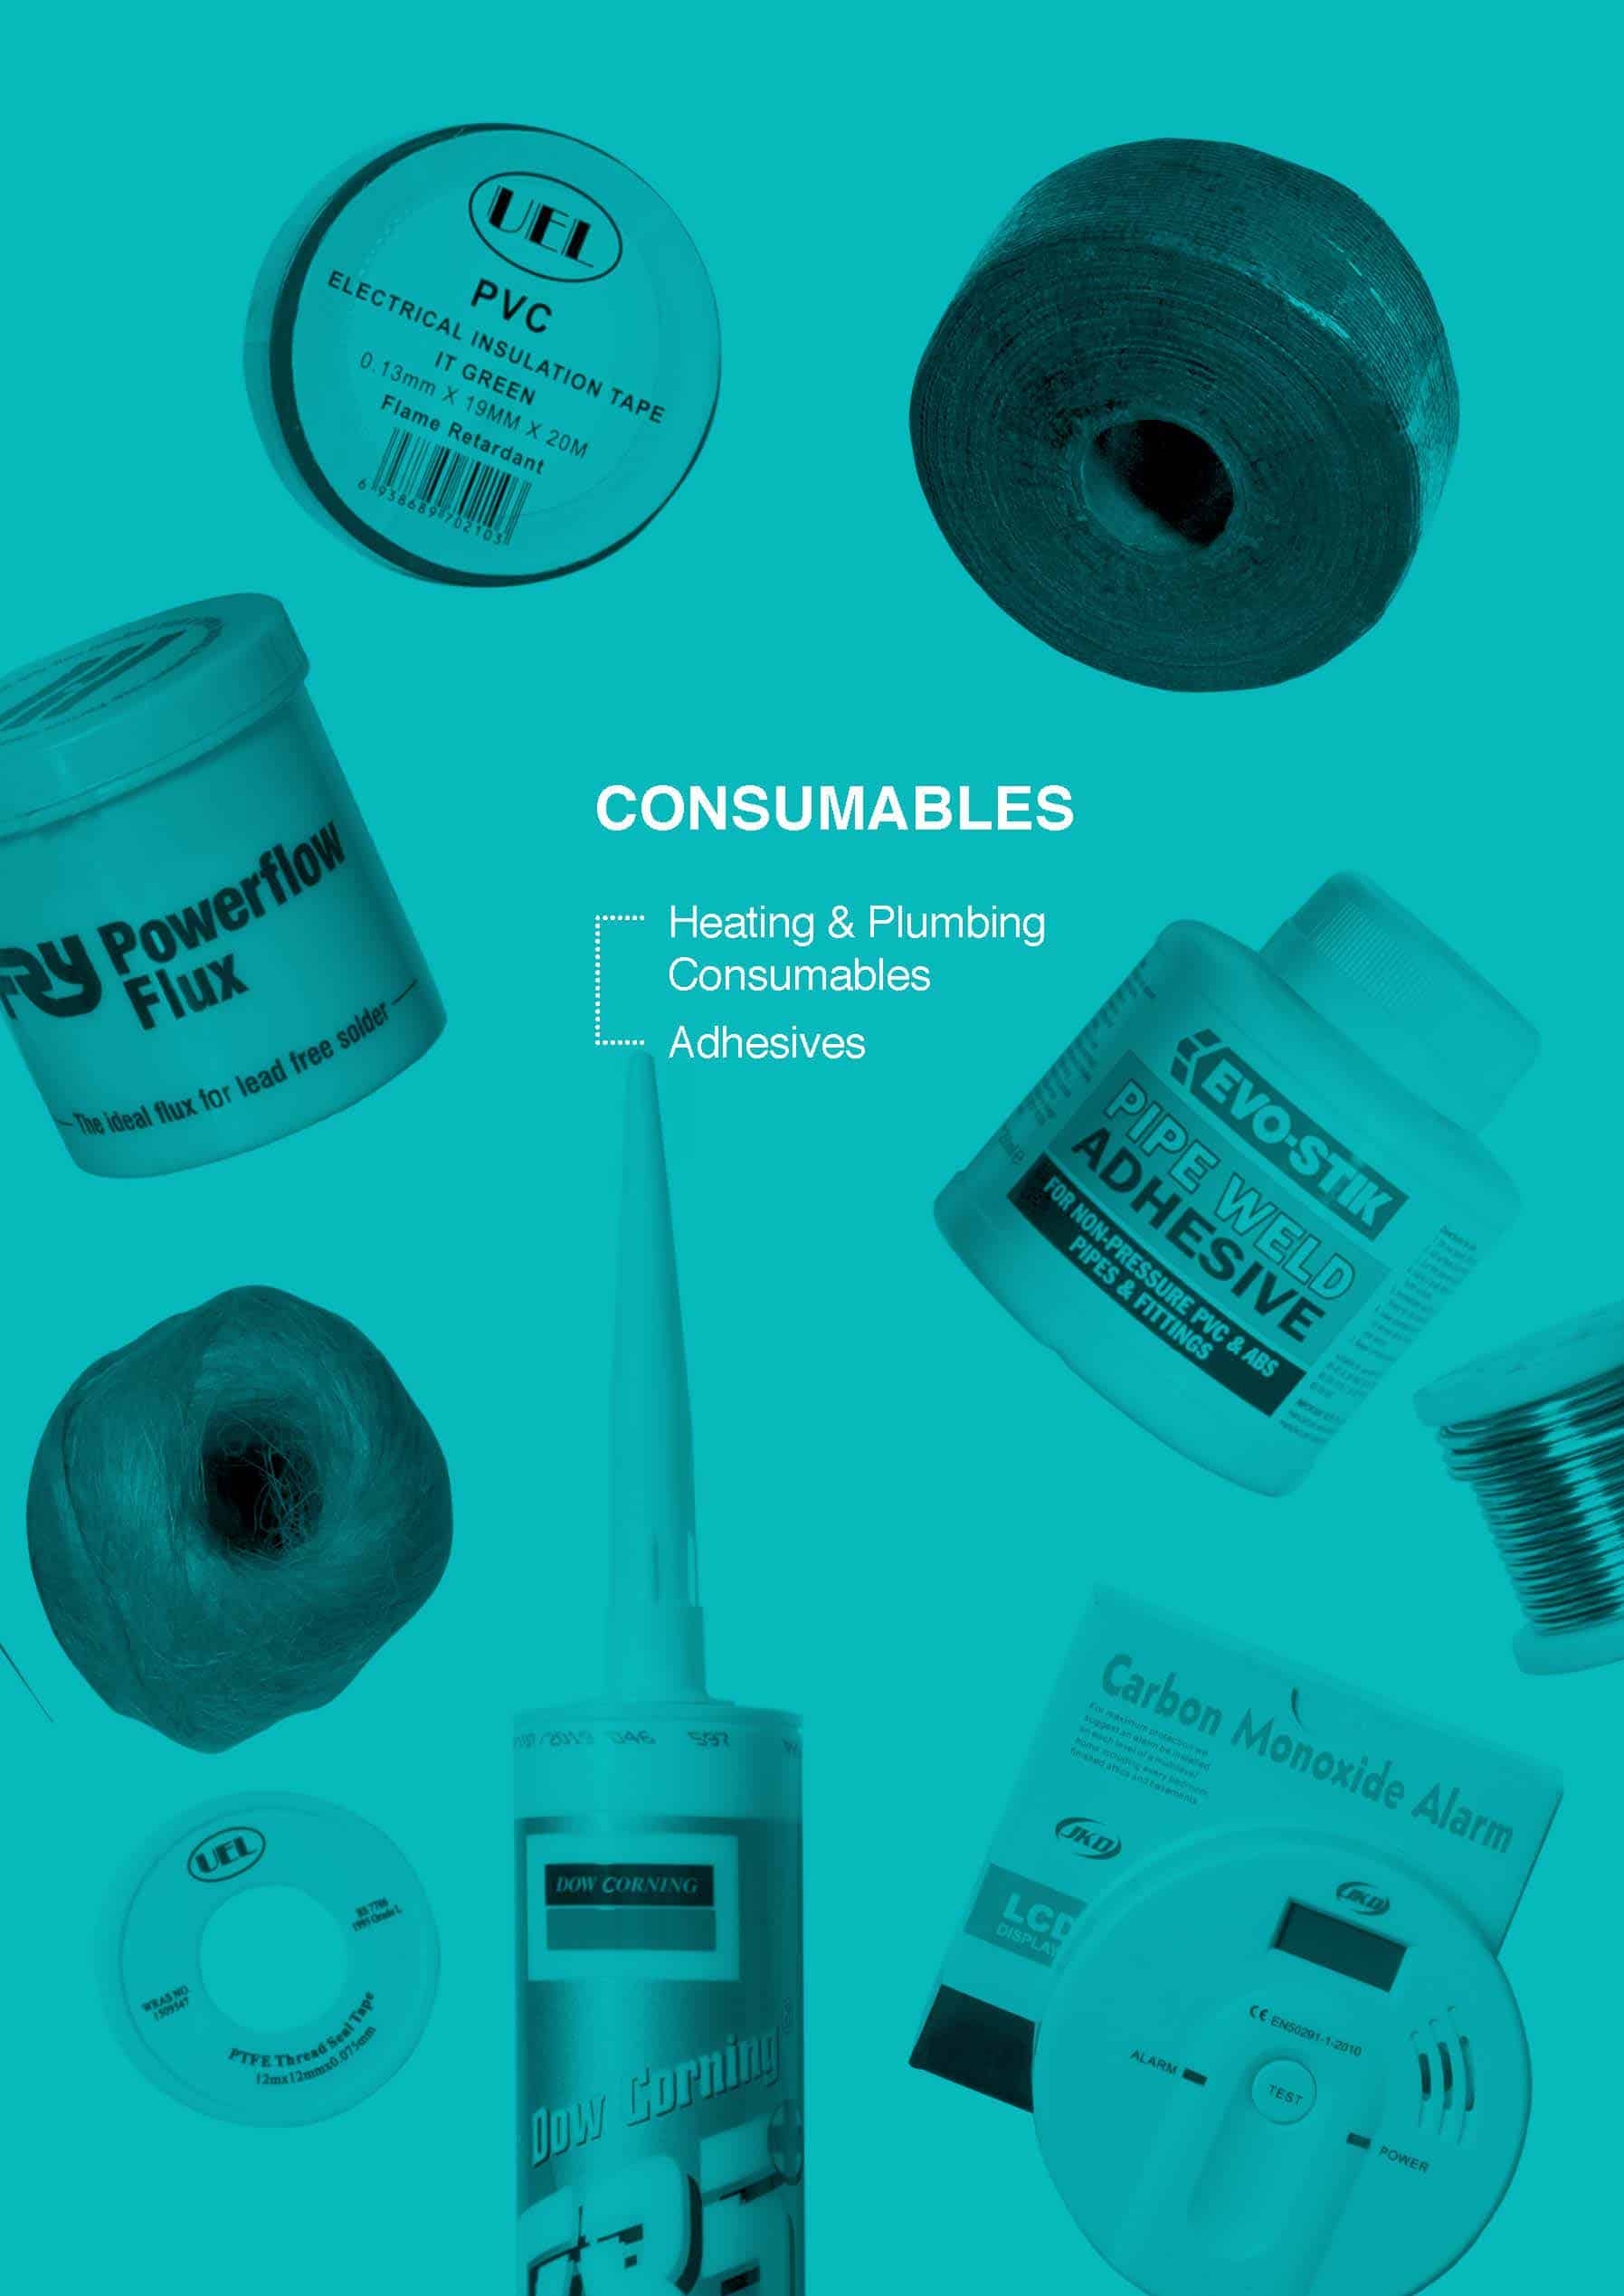 Consumables